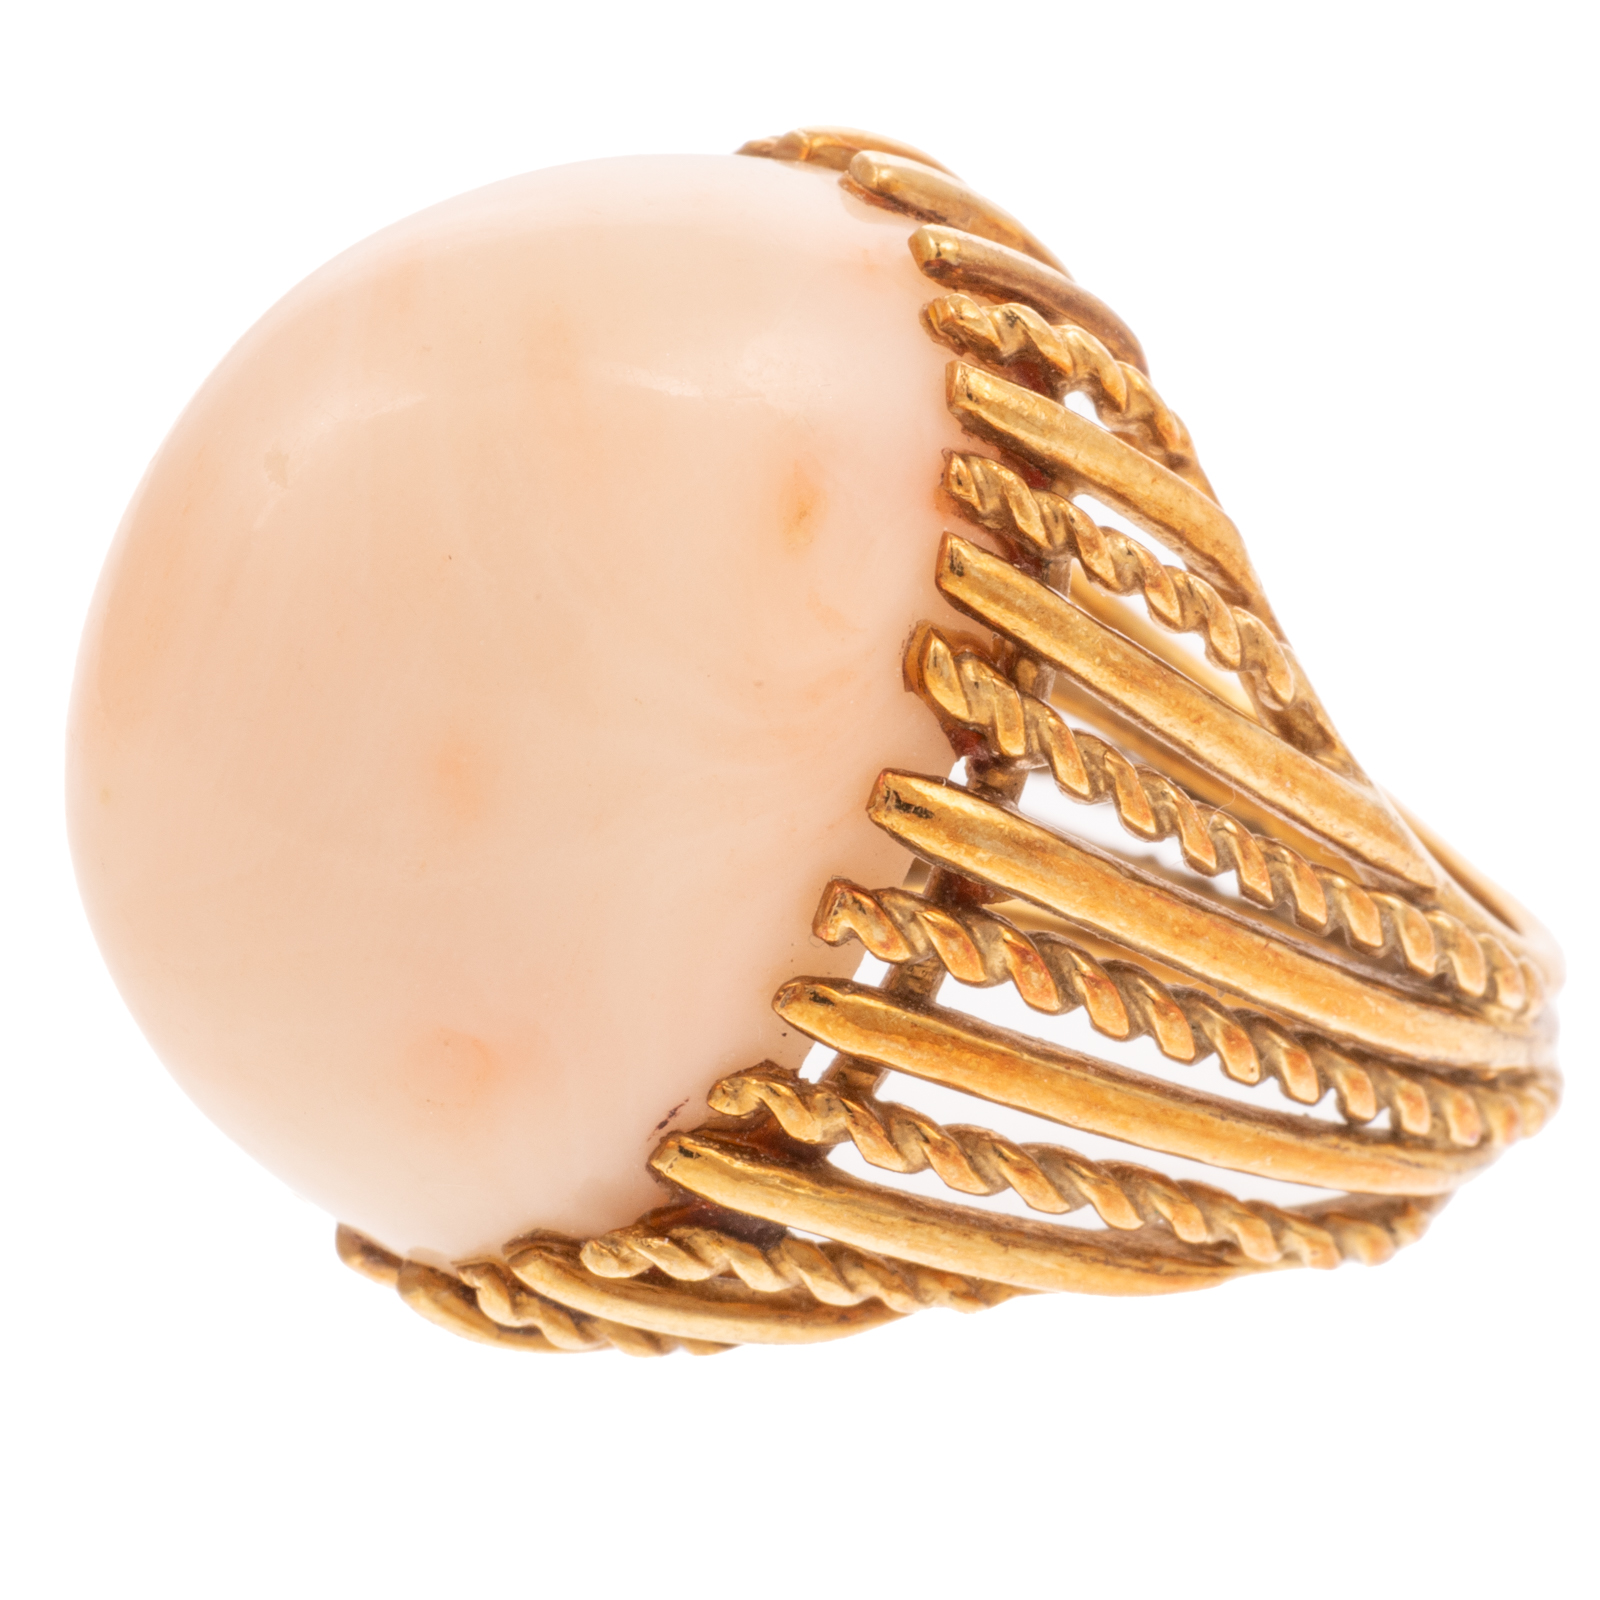 AN ANGEL SKIN CORAL DOME RING IN